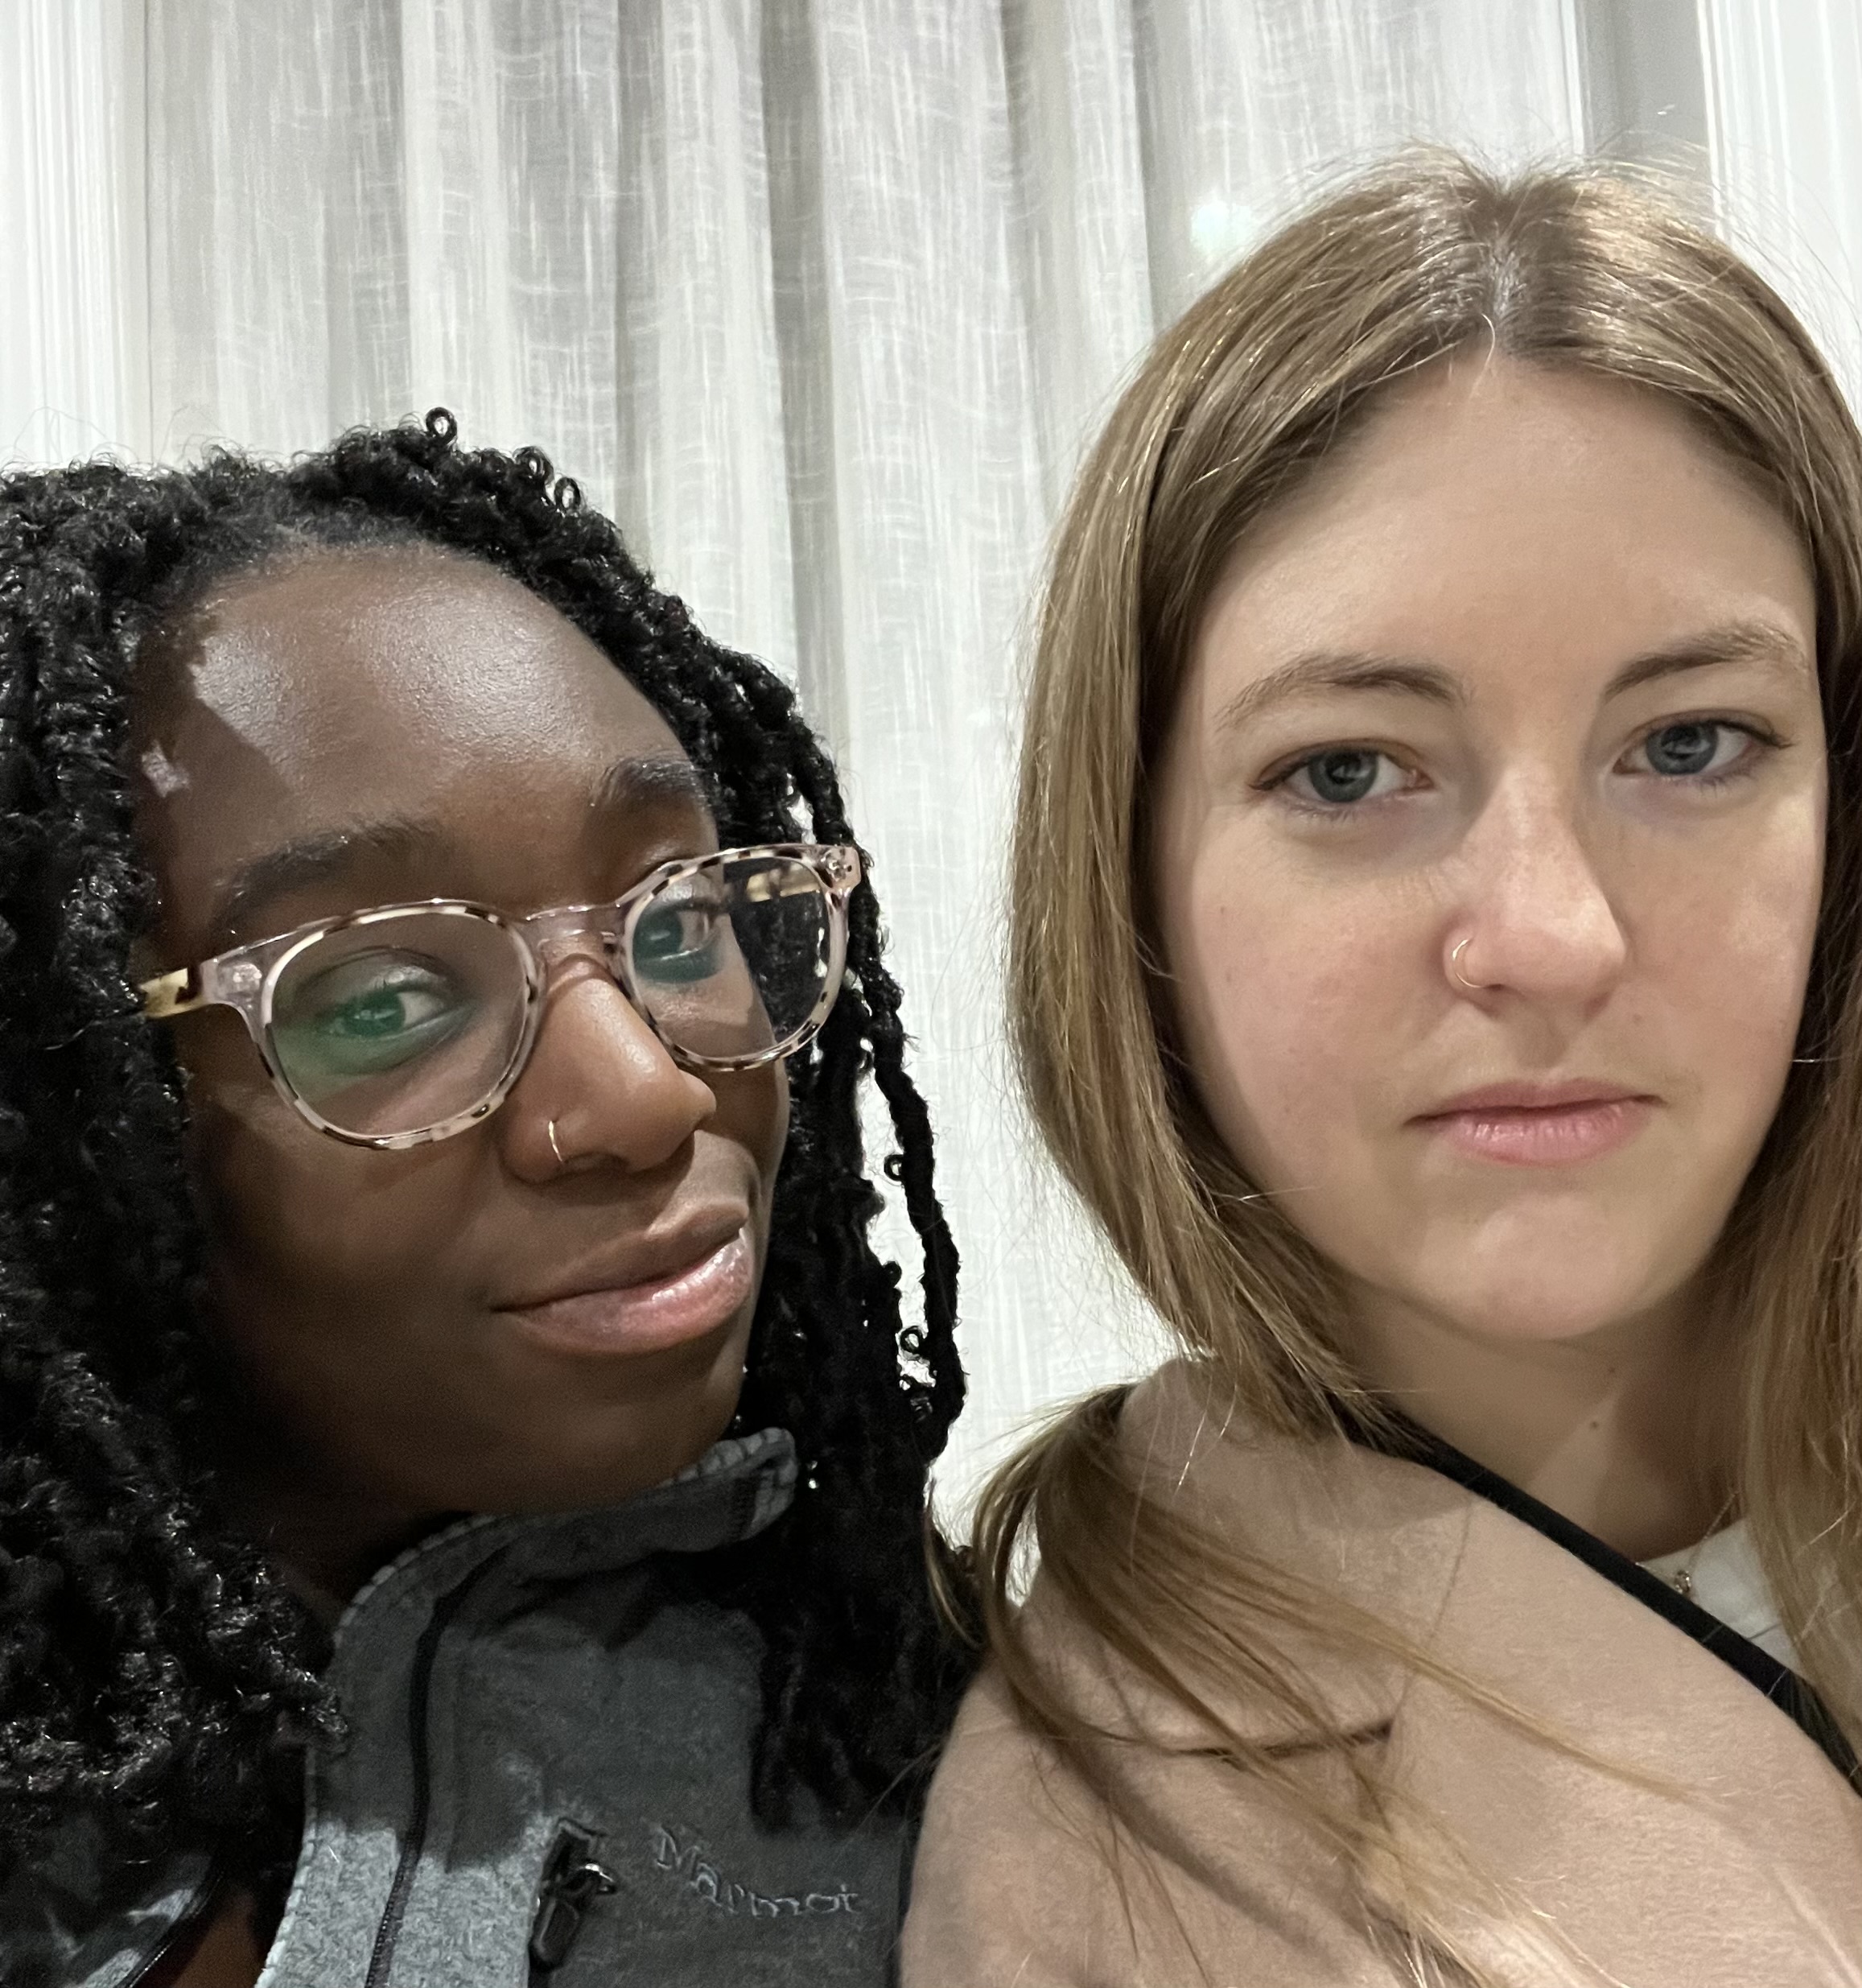 Two women pose for a selfie wearing fake nose rings.